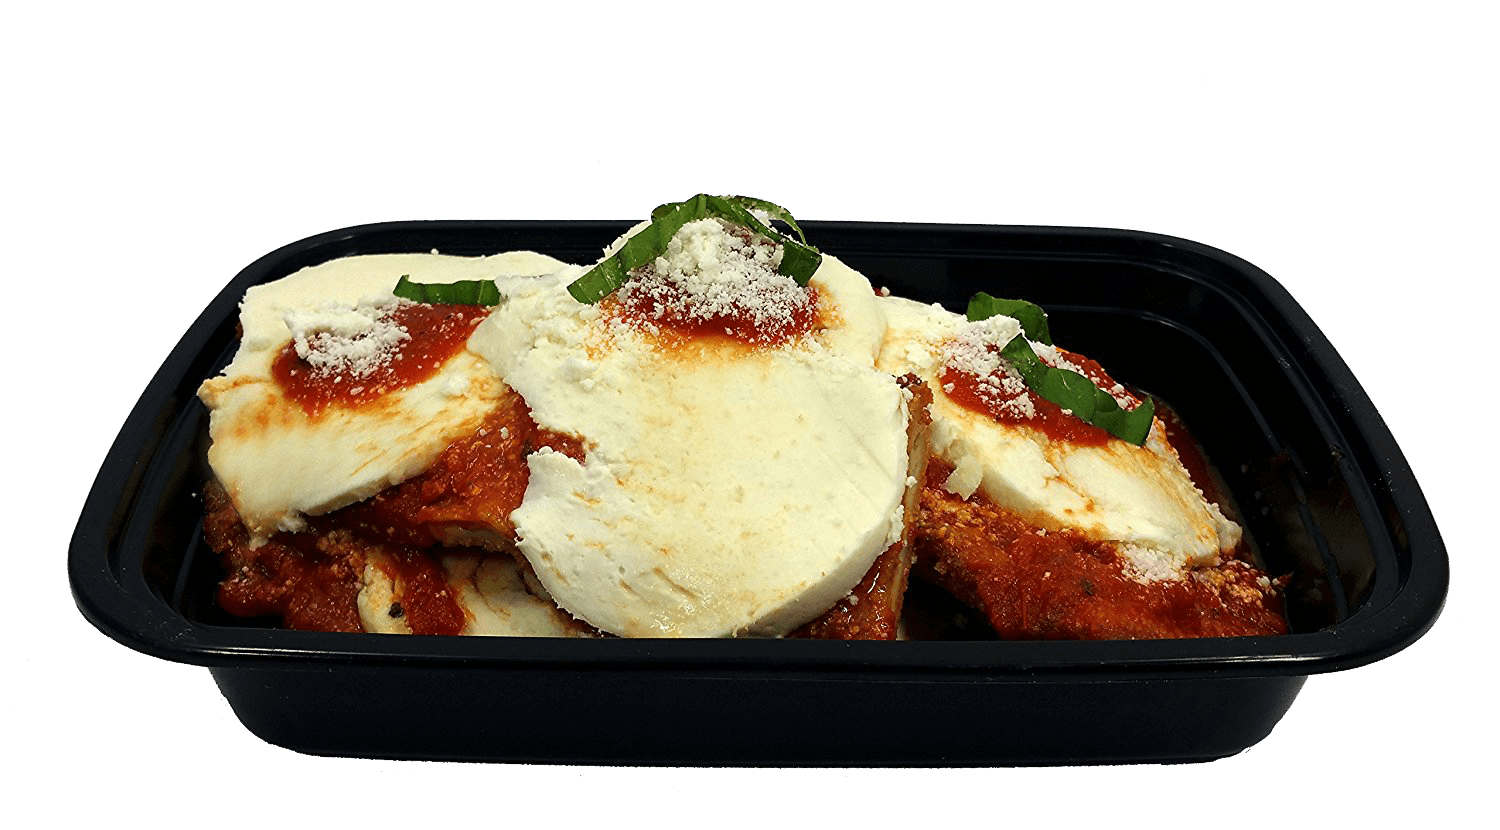 Prepared Food - Chicken Cutlet Parmigiana (Bell And Evans) 1.5 Pounds Made Fresh Daily - Heat And Serve